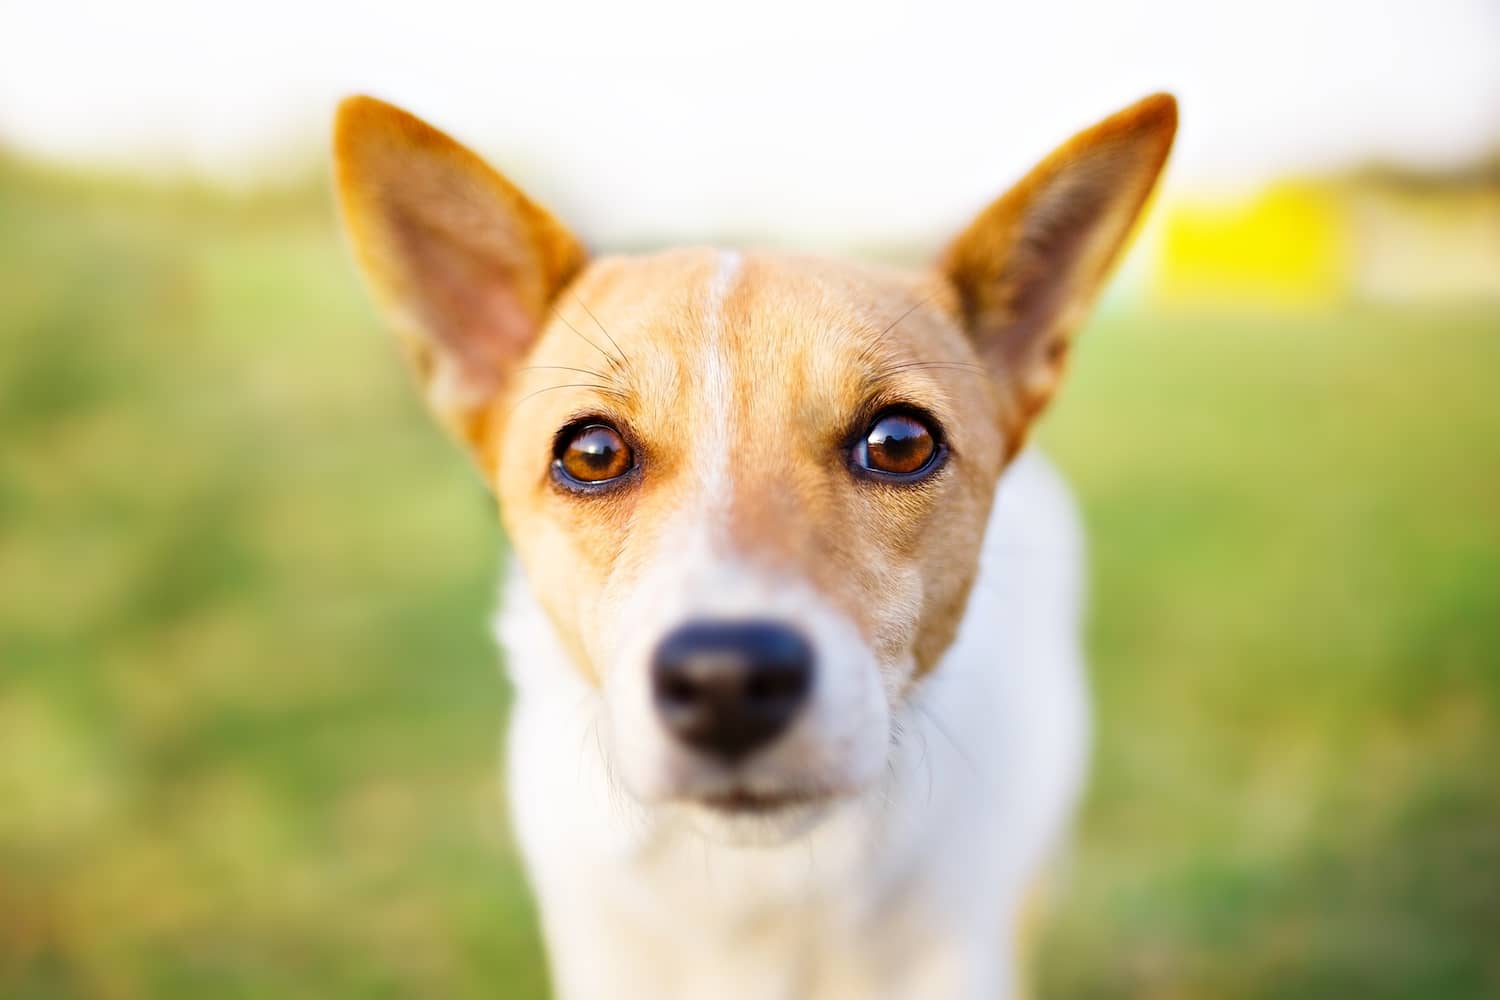 What Causes A Dog's Eye To Bulge